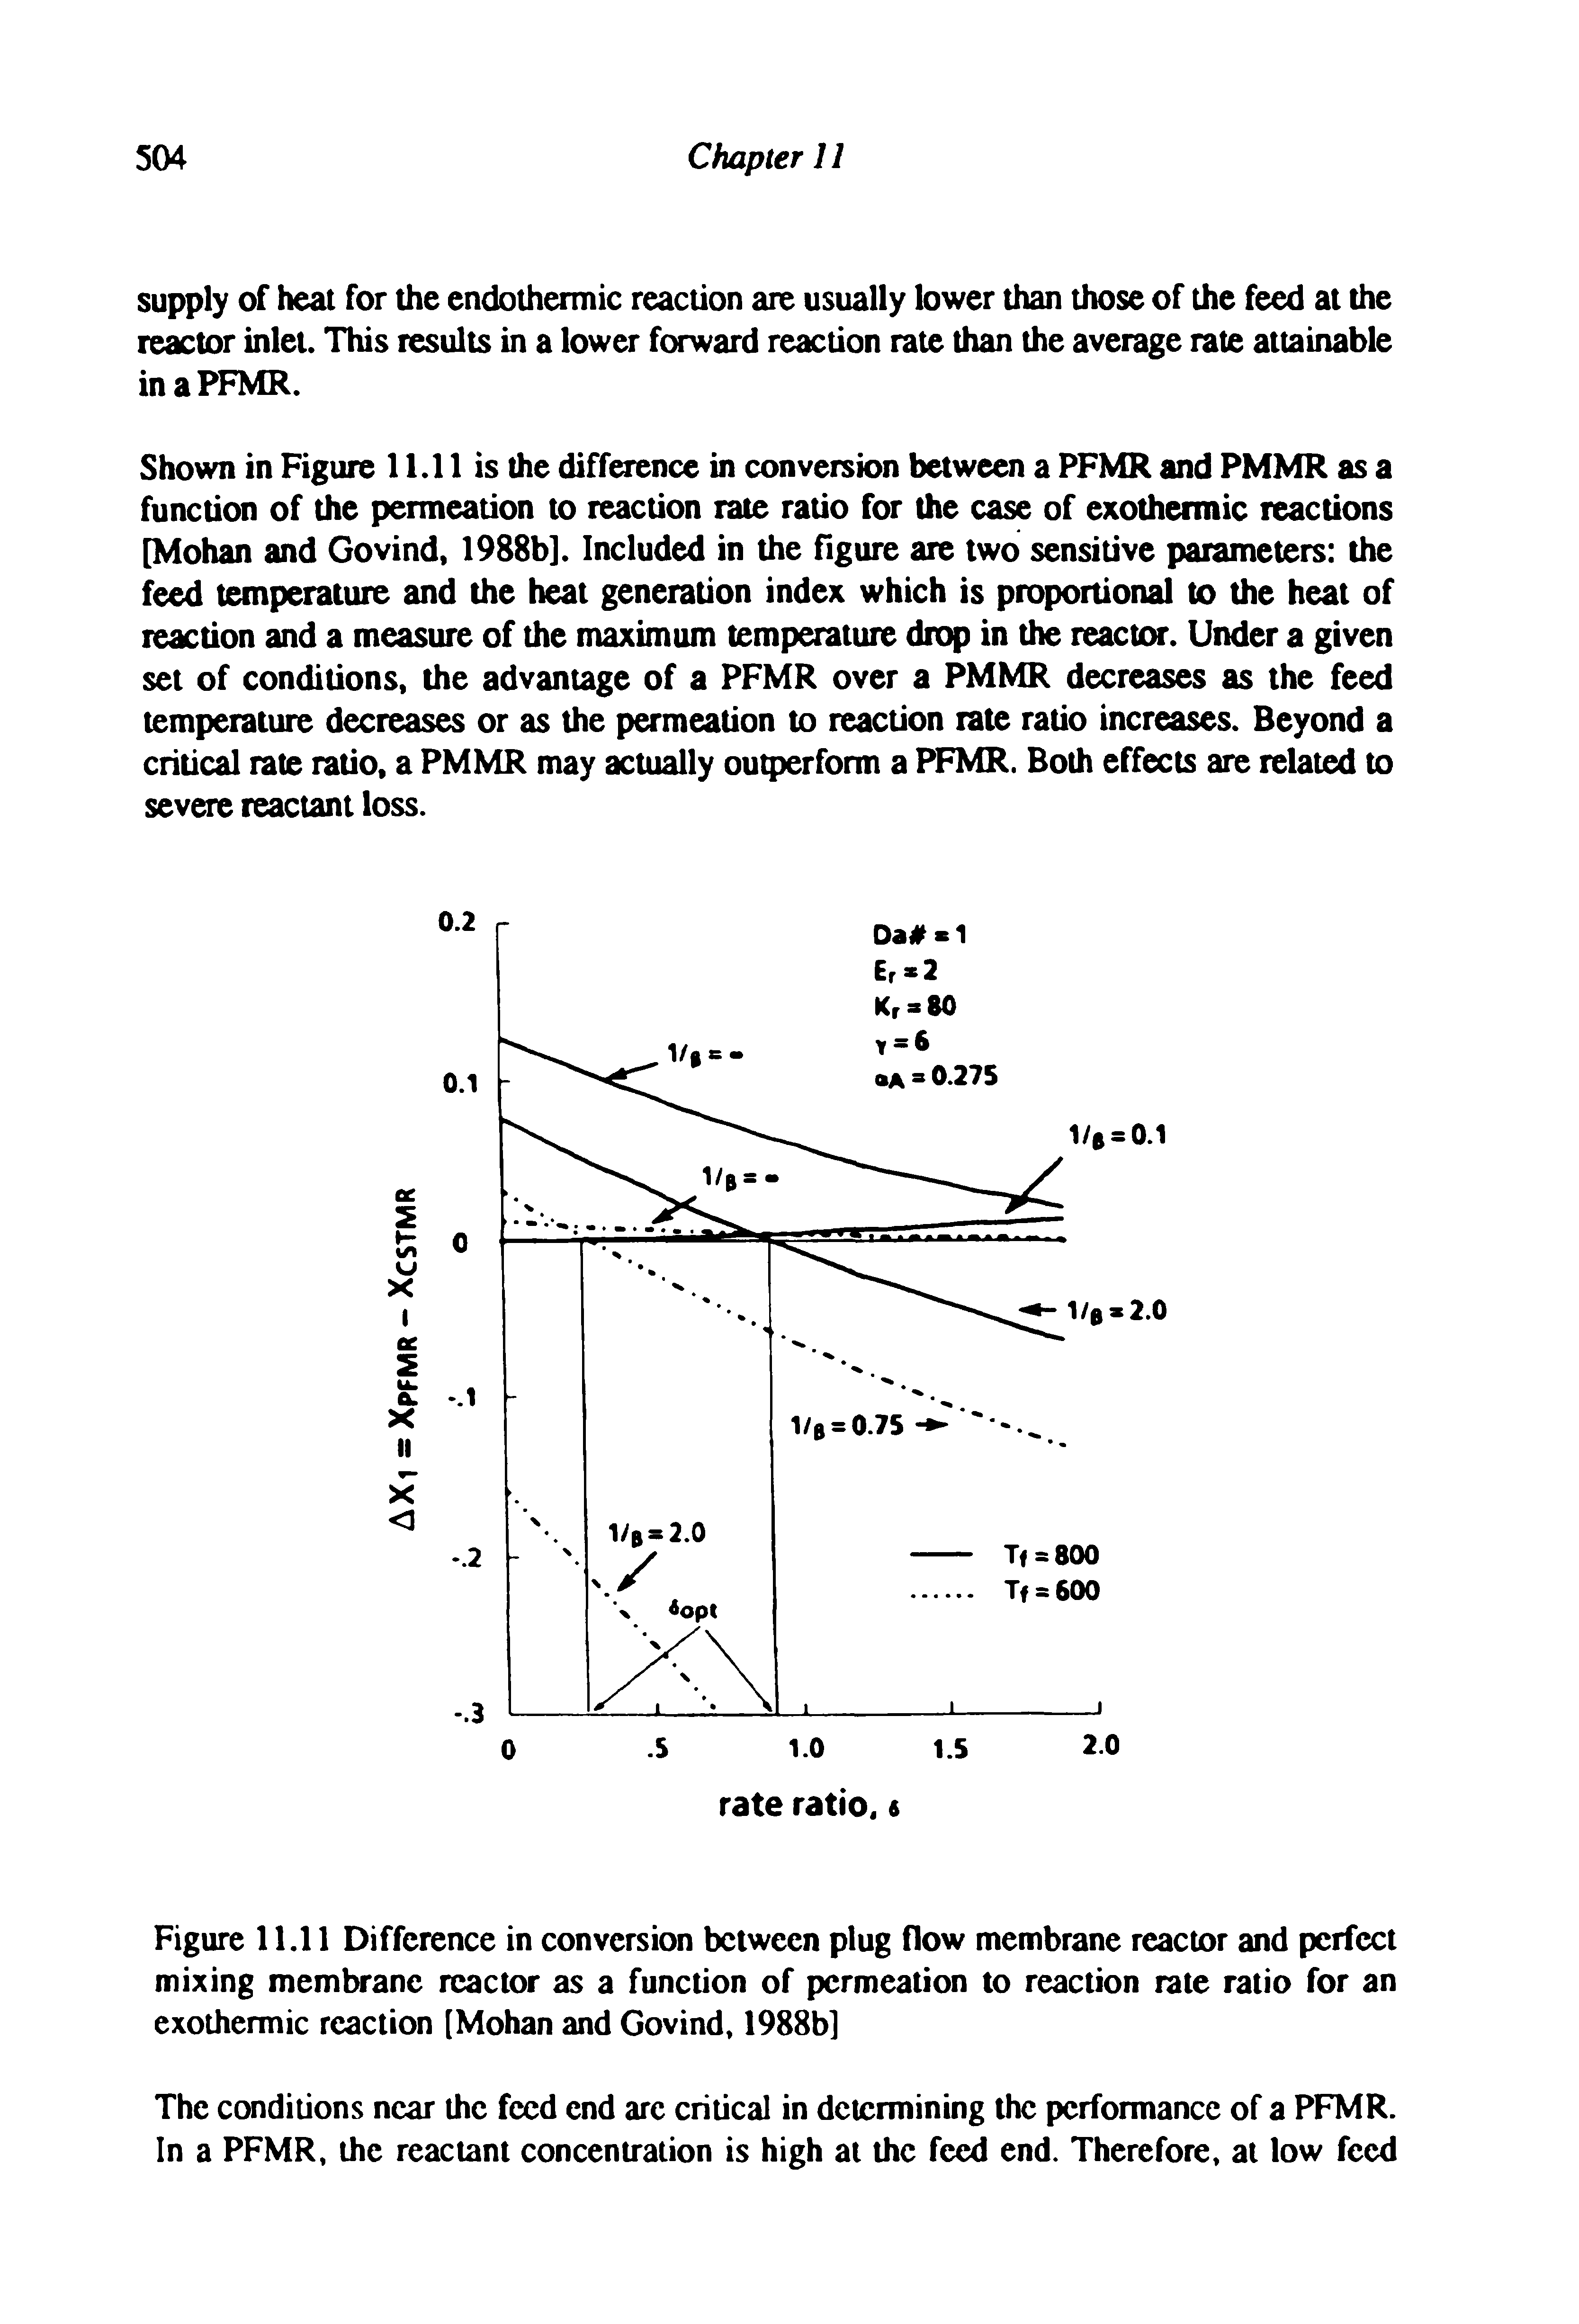 Figure 11.11 Difference in conversion between plug flow membrane reactor and perfect mixing membrane reactor as a function of permeation to reaction rate ratio for an exothermic reaction [Mohan and Govind, 1988b]...